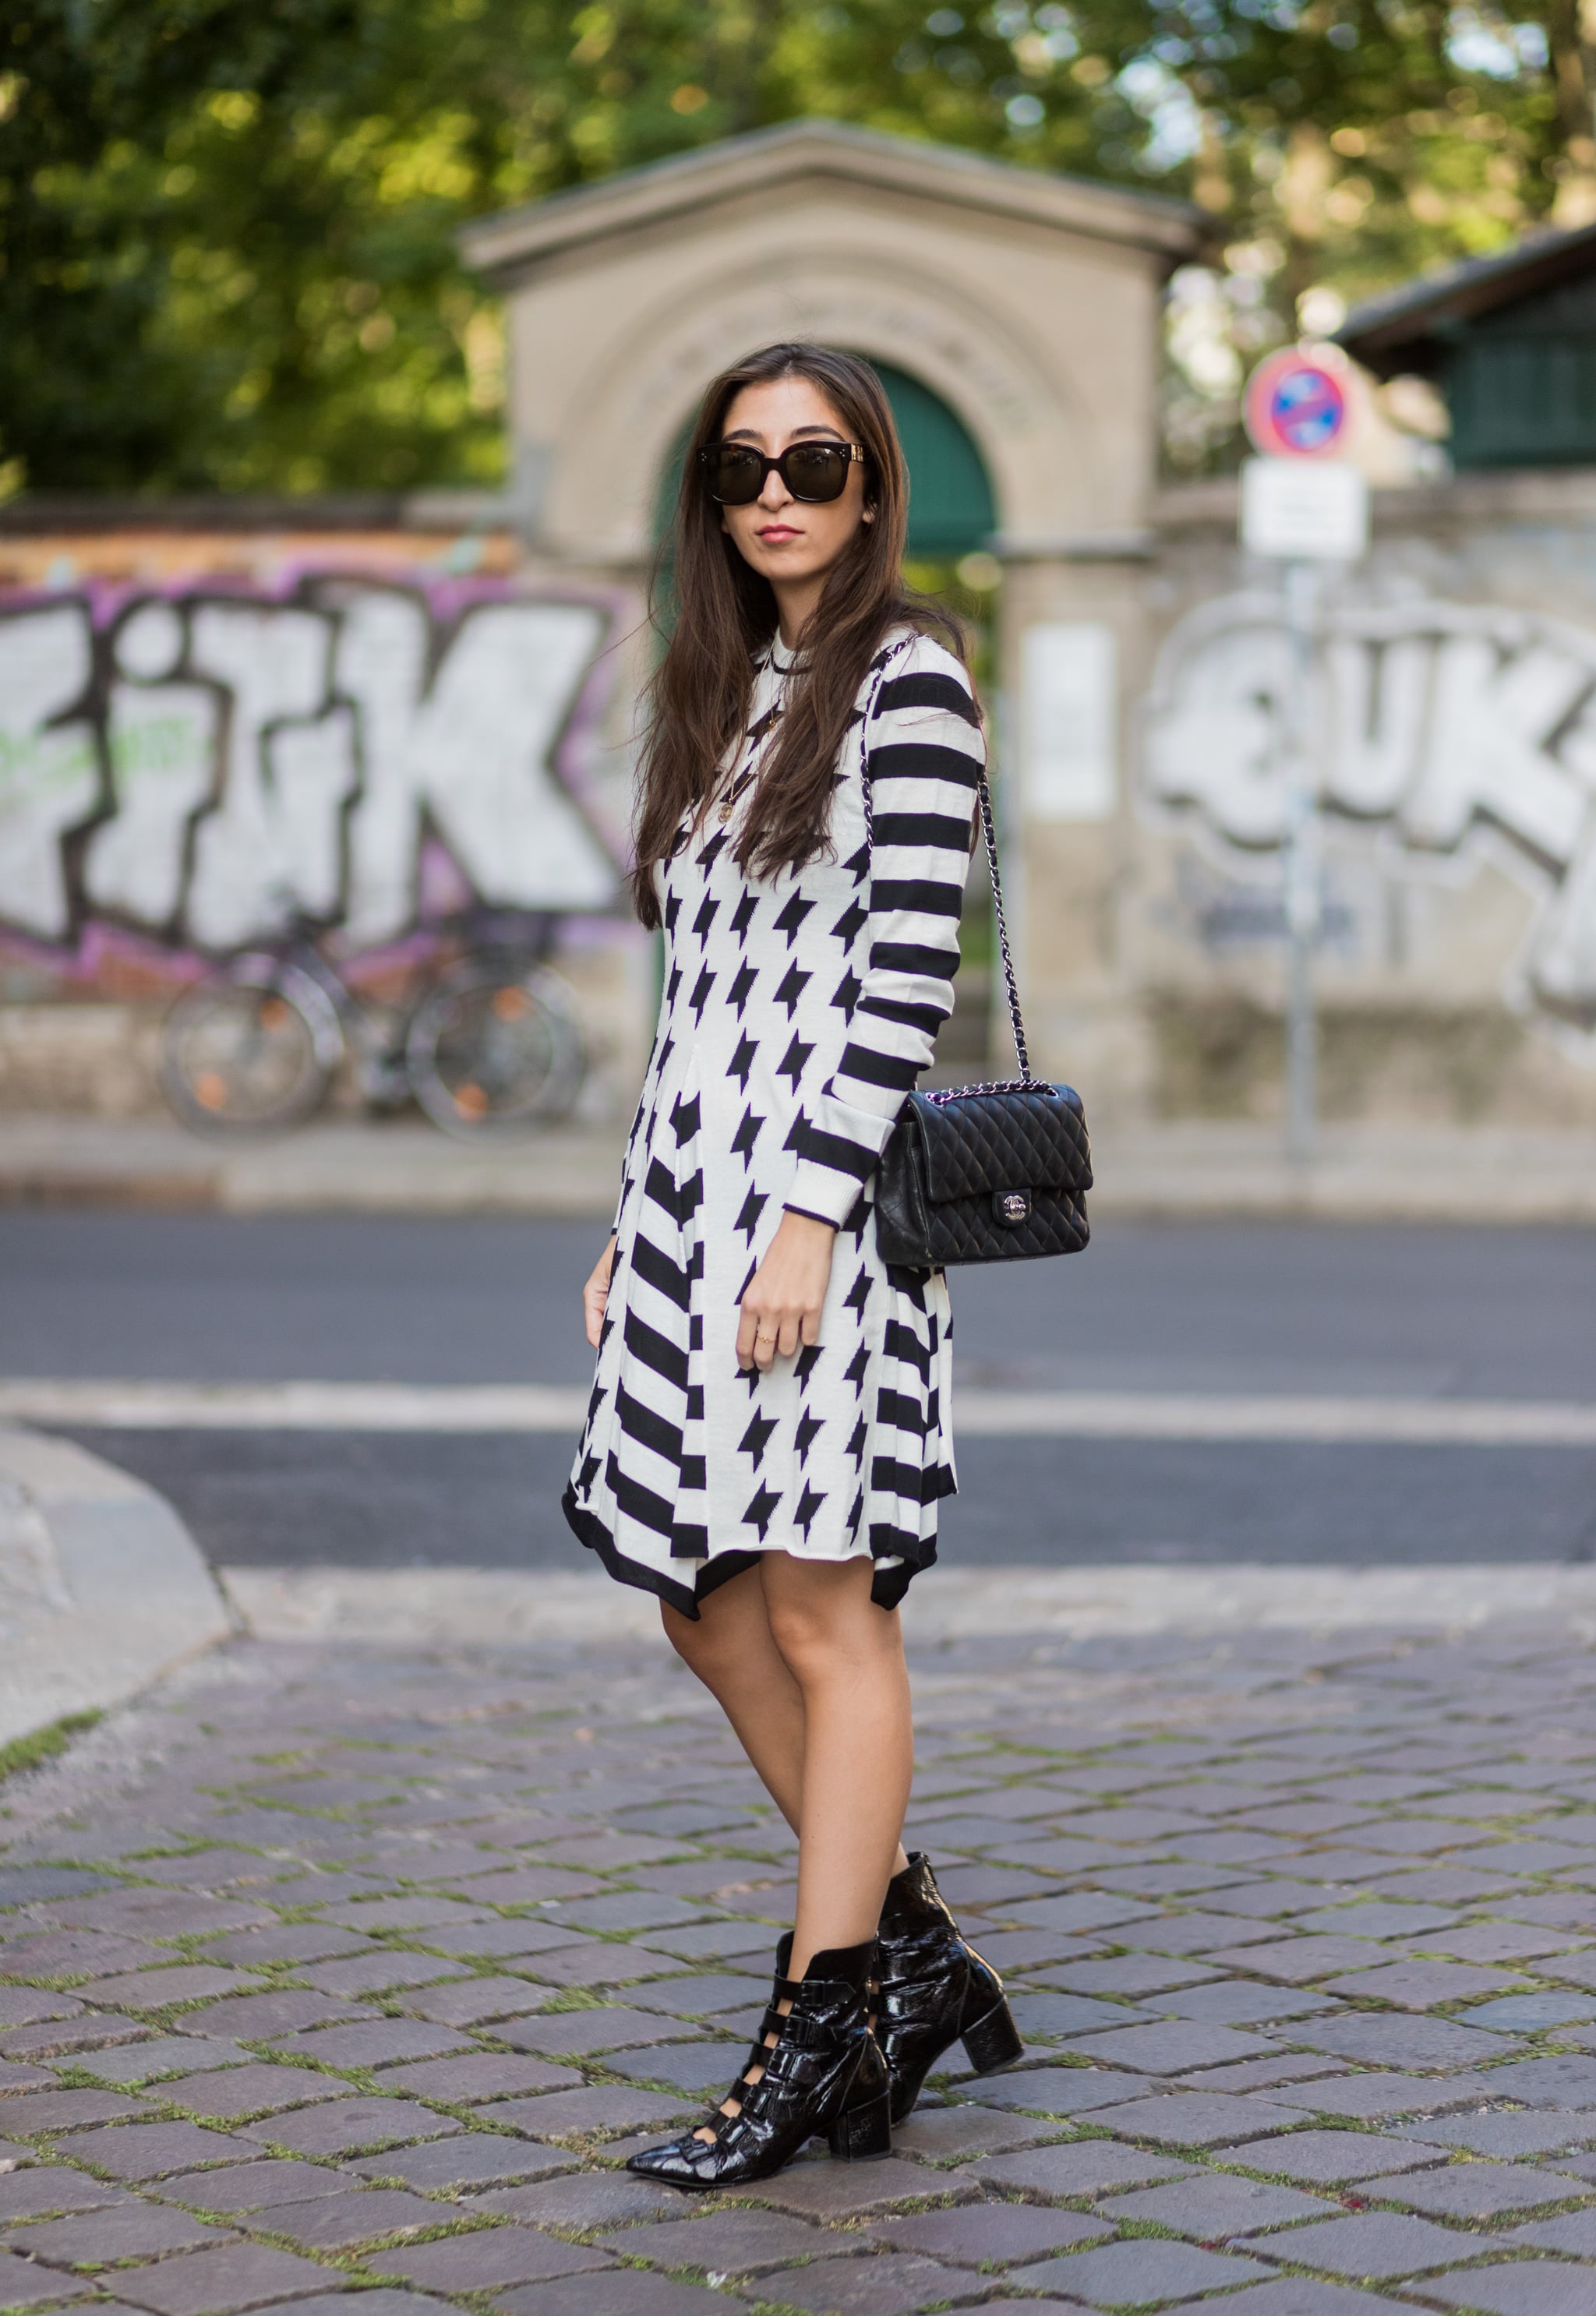 dresses that go with booties